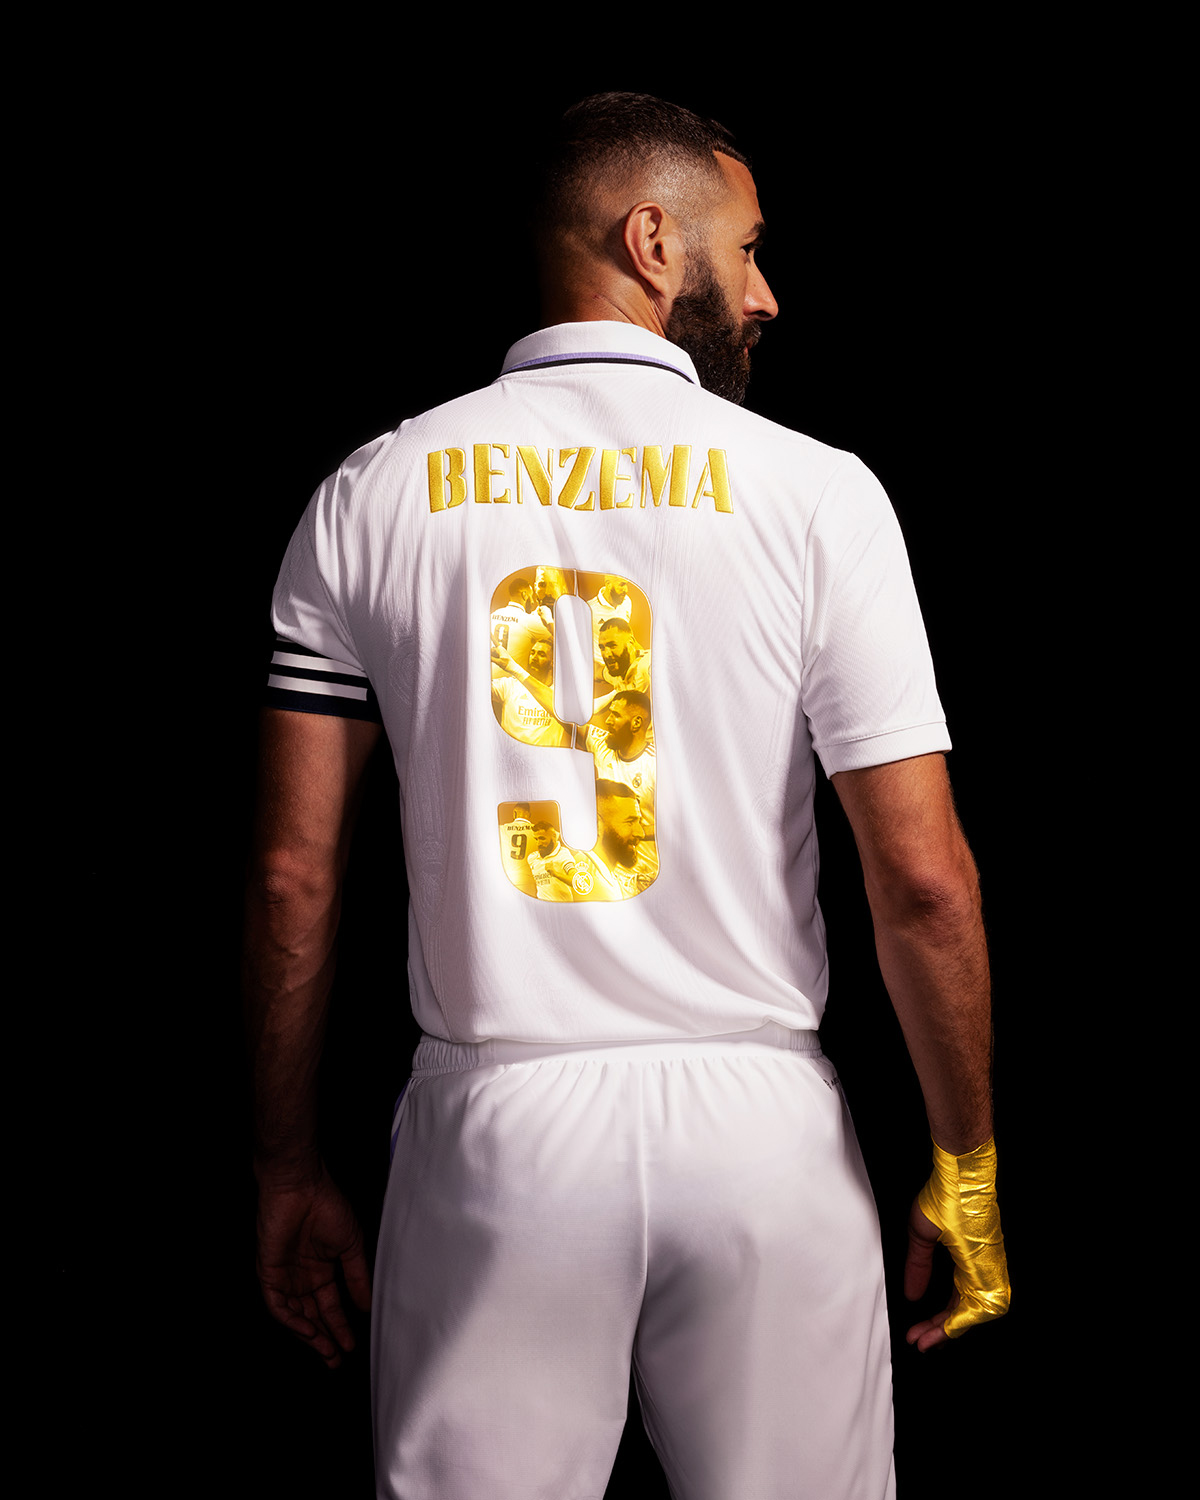 Forblive Melankoli efterfølger Classic Football Shirts on X: "Real Madrid and Adidas have released a  special, limited edition shirt to celebrate Benzema winning the Ballon d'Or  last night. https://t.co/M3uh39Qjg7" / X